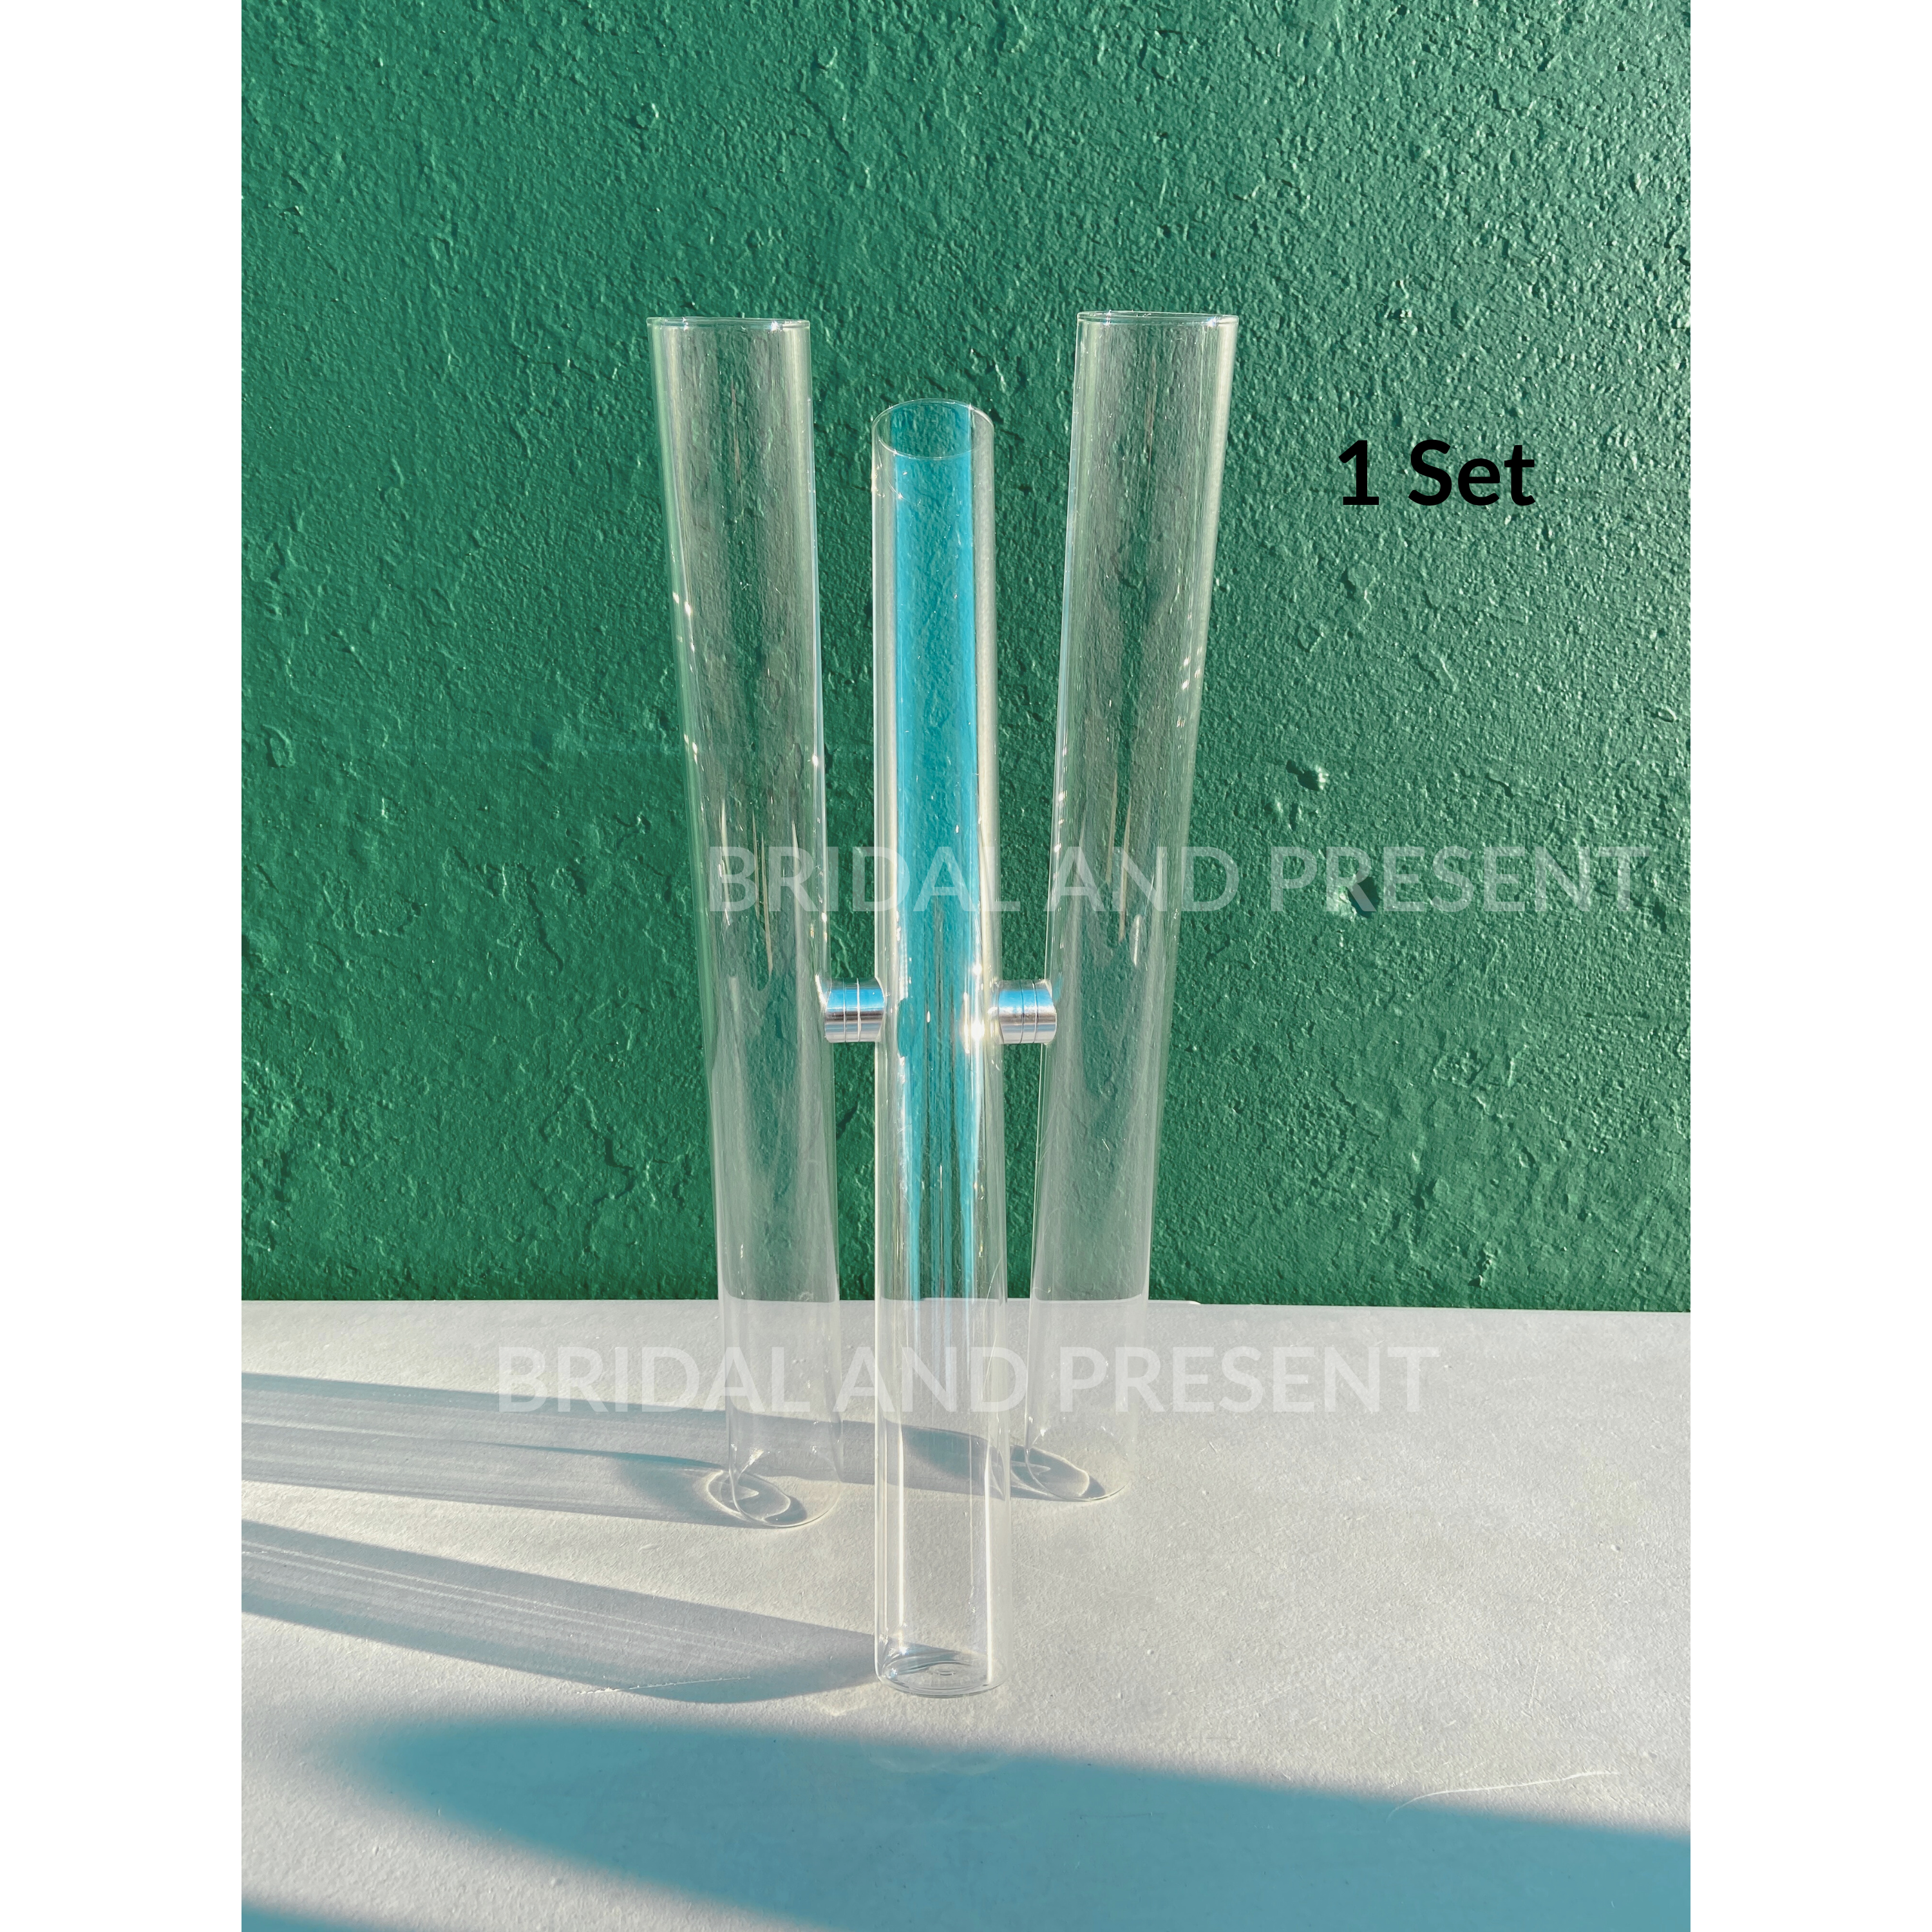 Glass tube vases centerpiece for wedding is perfect for wedding table arrangements. Inspired by wedding centerpiece ideas, DIY wedding centerpieces for round tables by using our tall gold centerpieces, flower column stands and boho wedding centerpieces at bridal shower, wedding reception, rehearsal dinner parties, and events.